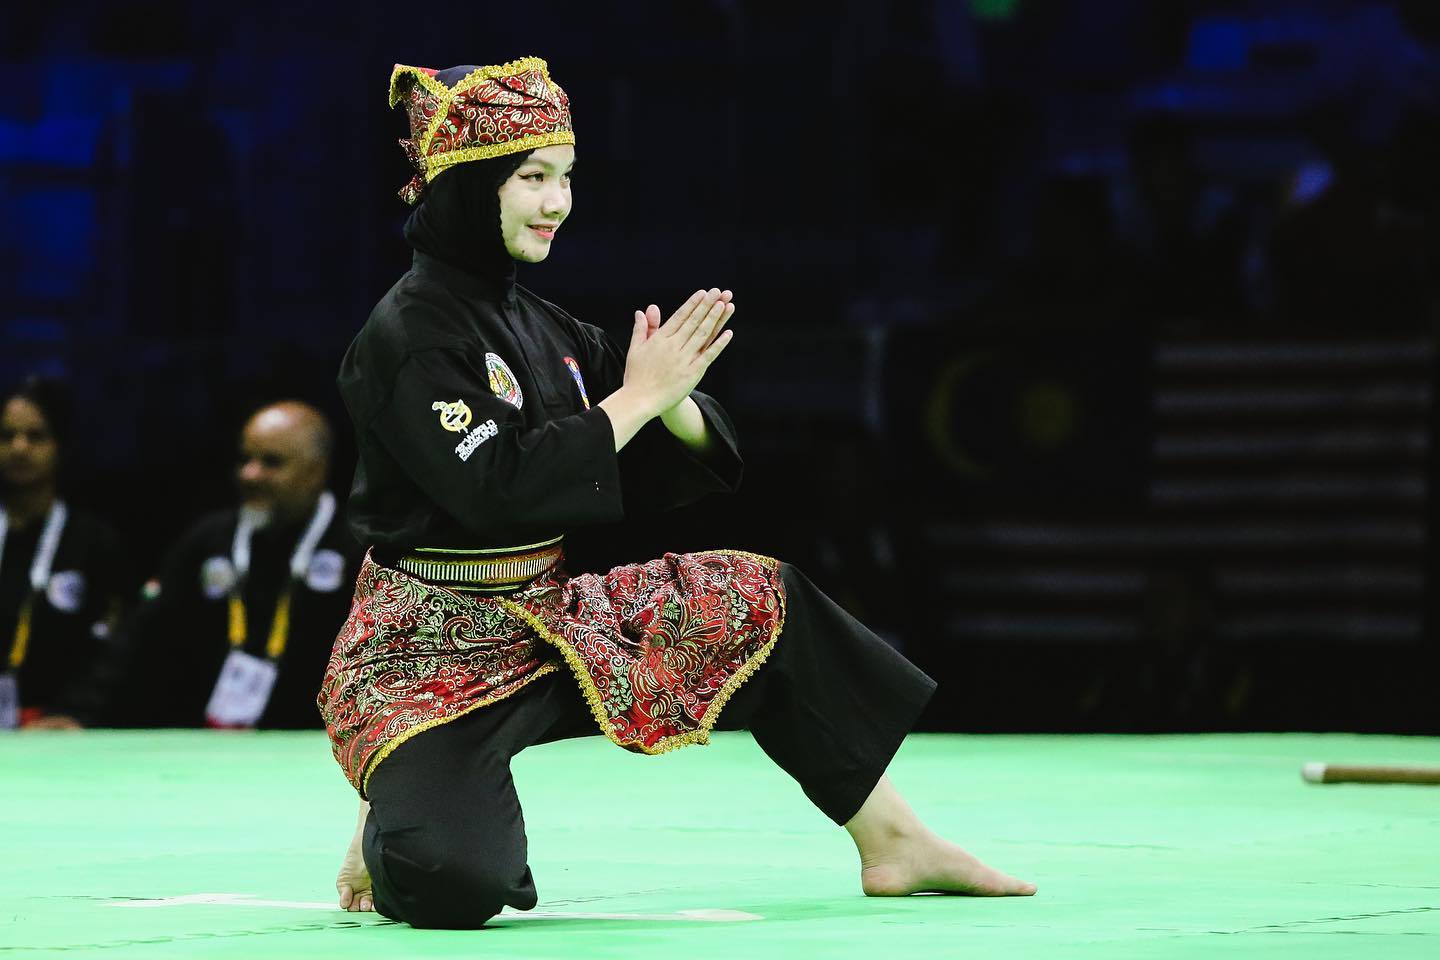 19-year-old Merrywati Manuil managed to bring home gold at the 2022 World Silat Championships. Image credit: Merrywati Manuil